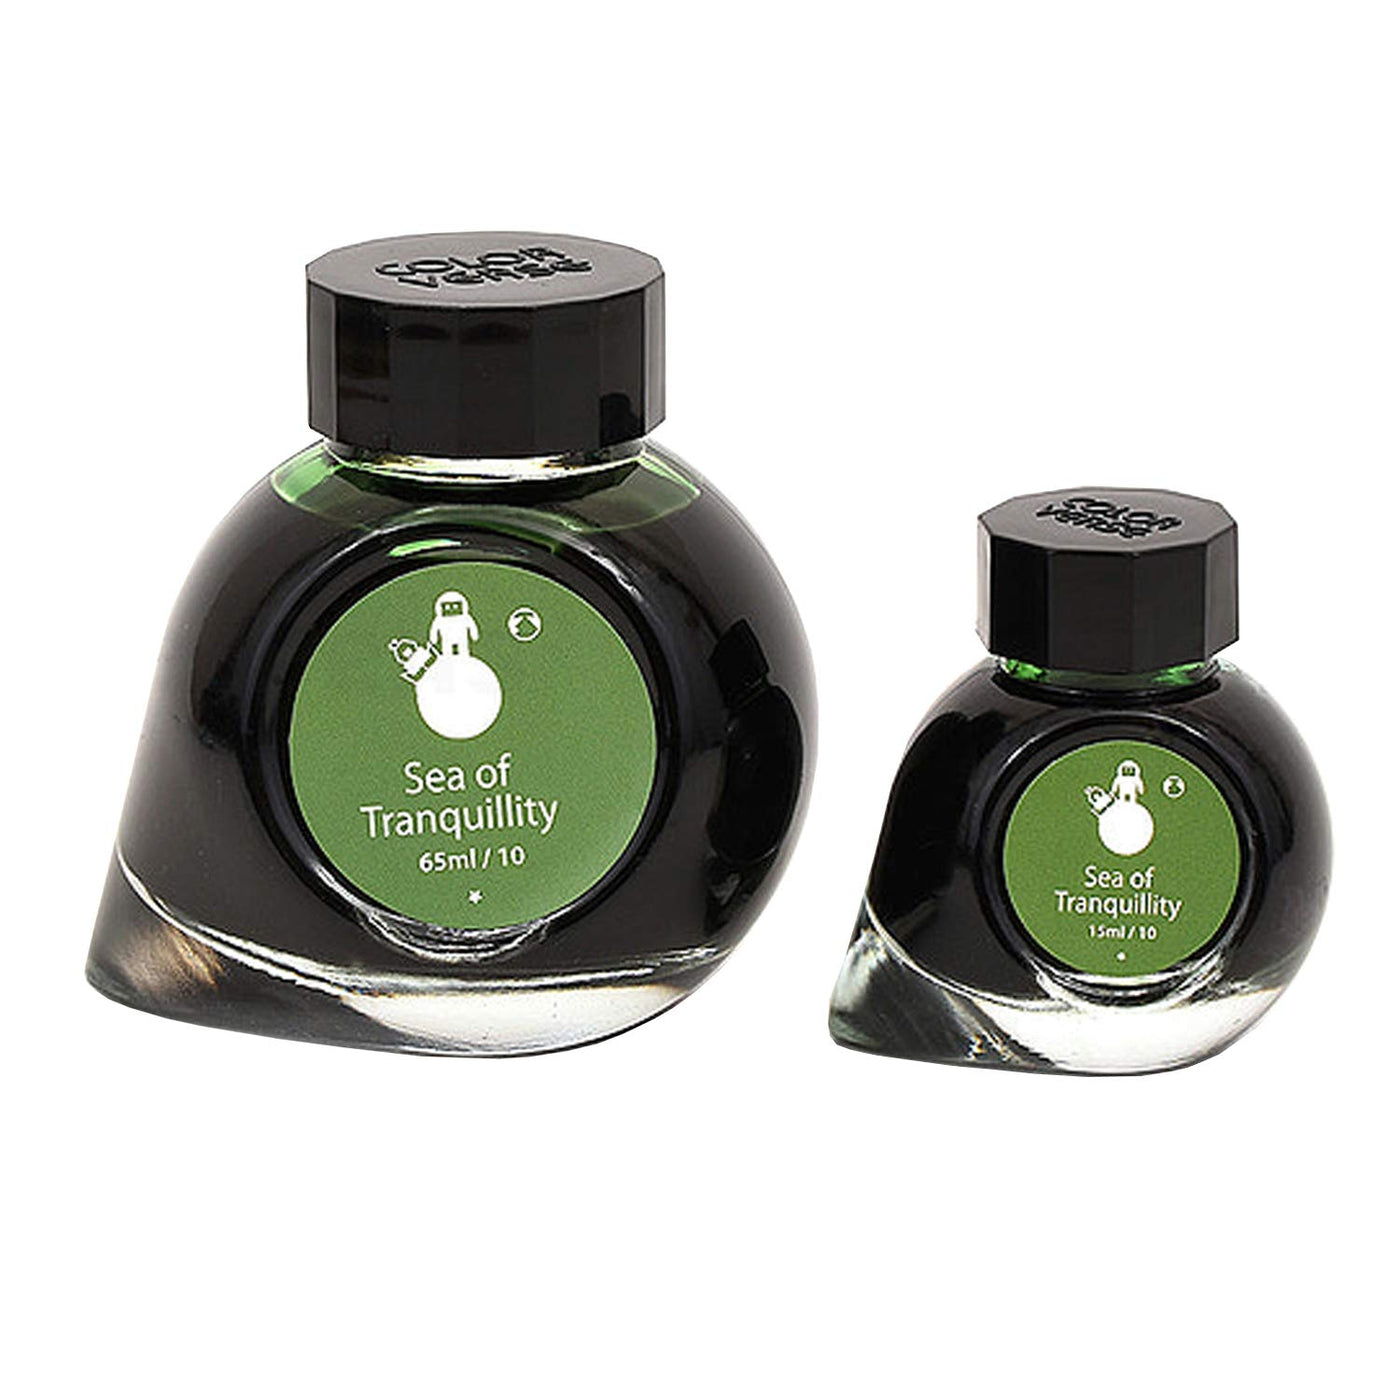 Colorverse Bottled Ink 65ml + 15ml Sea of Tranquility